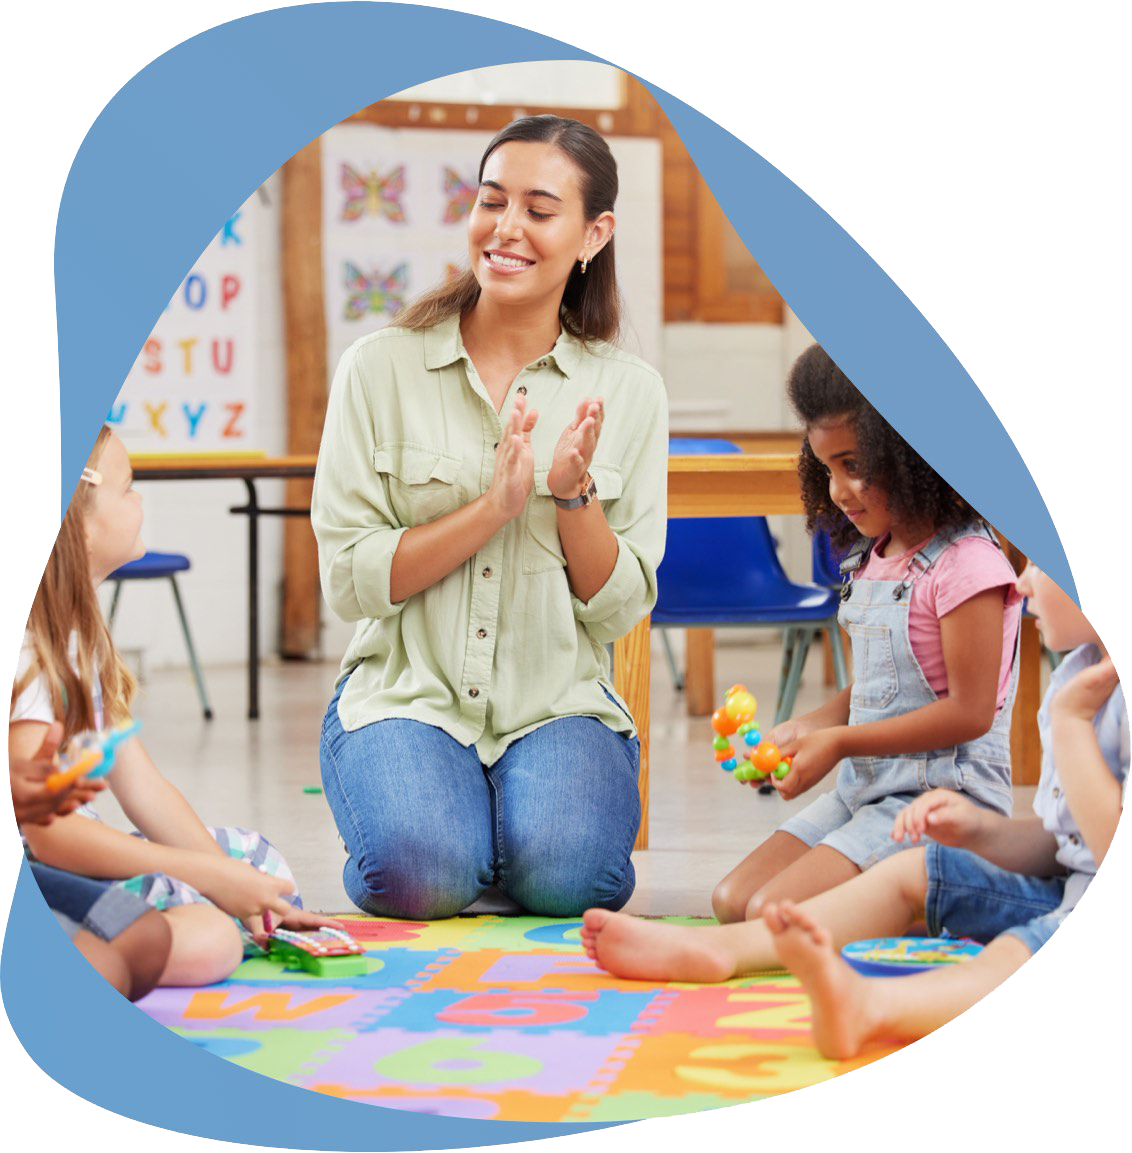 Jobs in childcare near me